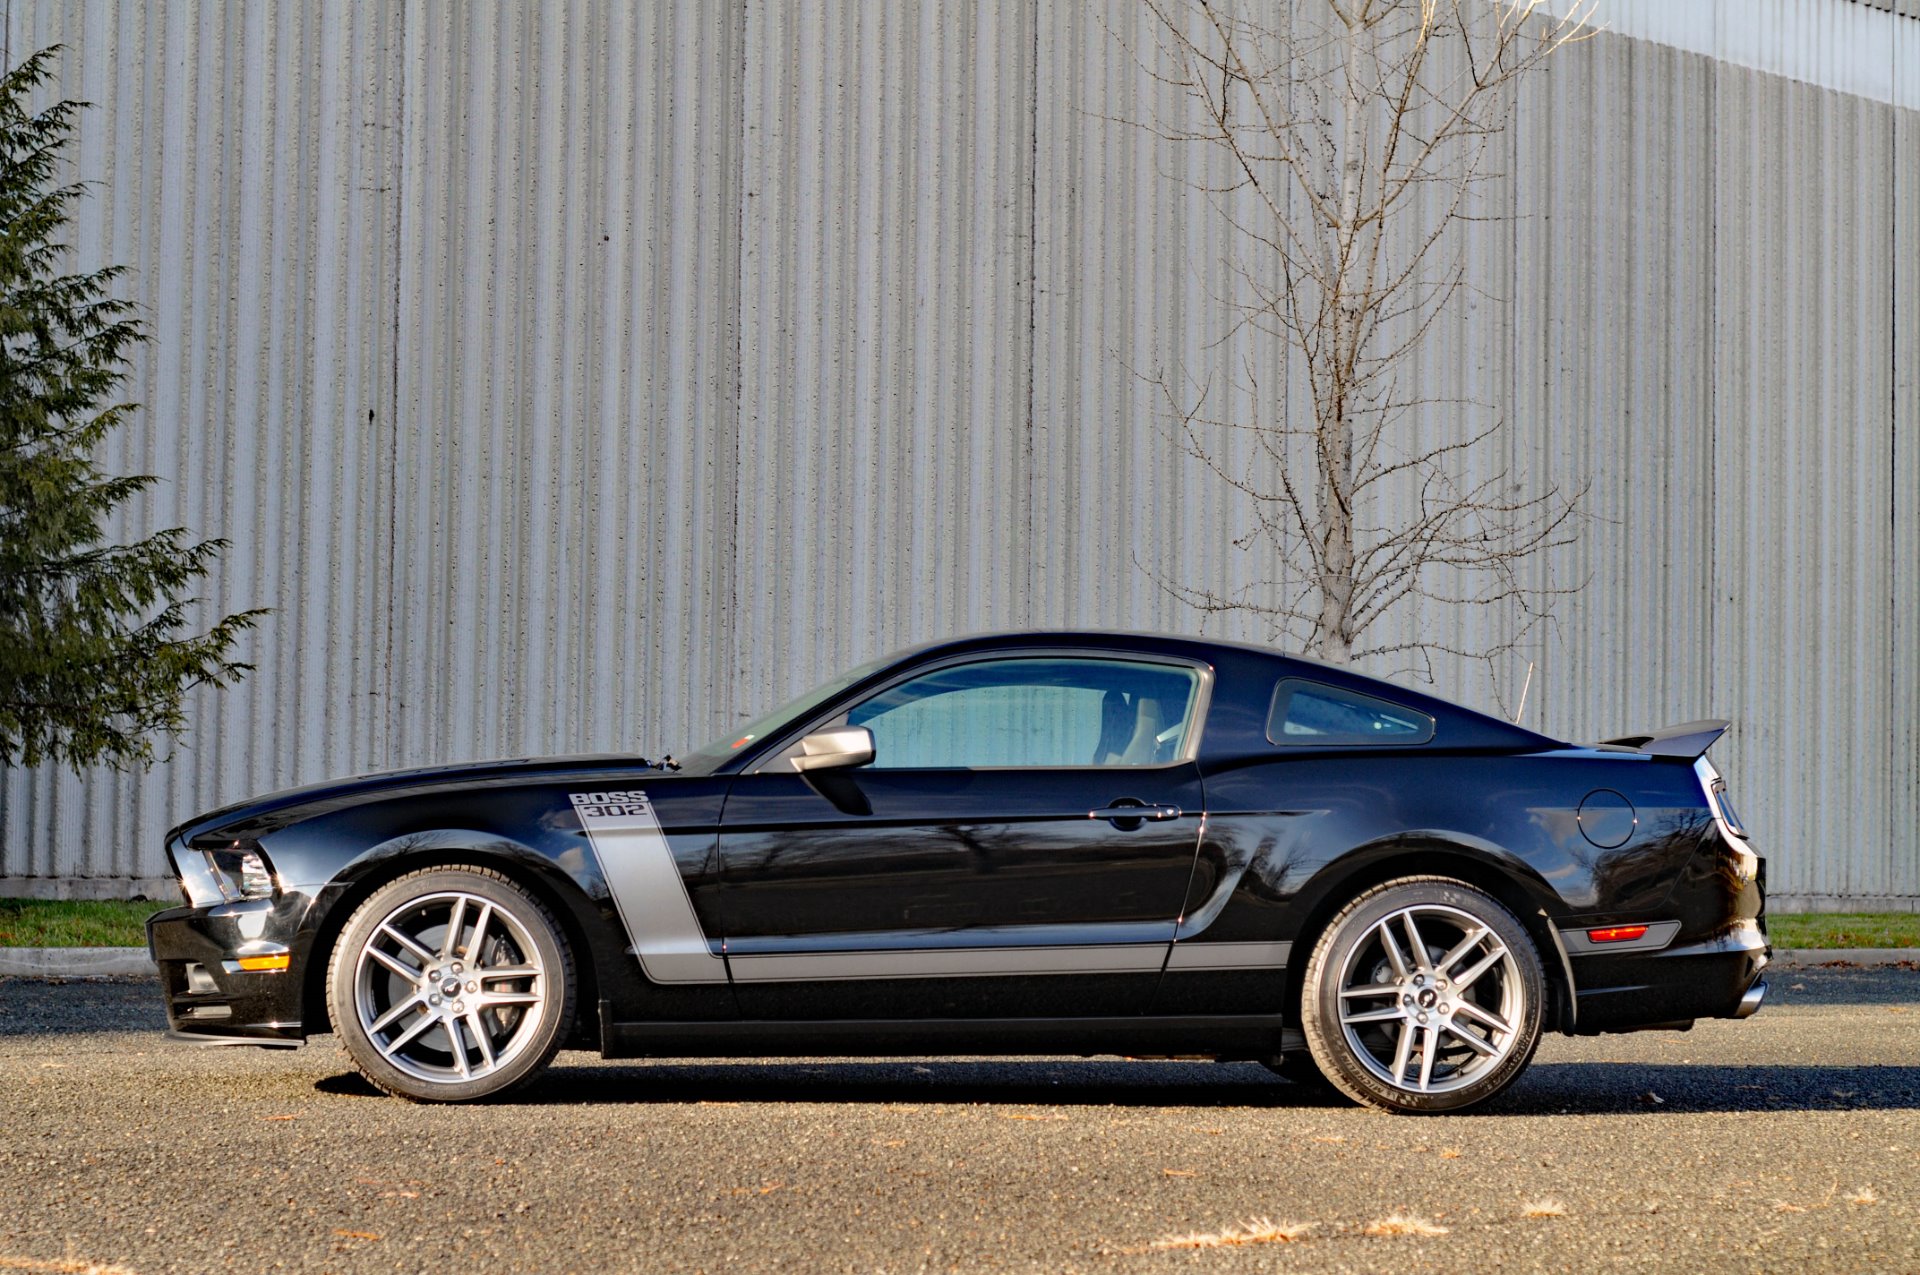 Used 2013 Ford Mustang Boss 302 For Sale (Special Pricing) Ambassador Automobile LLC. Stock #154